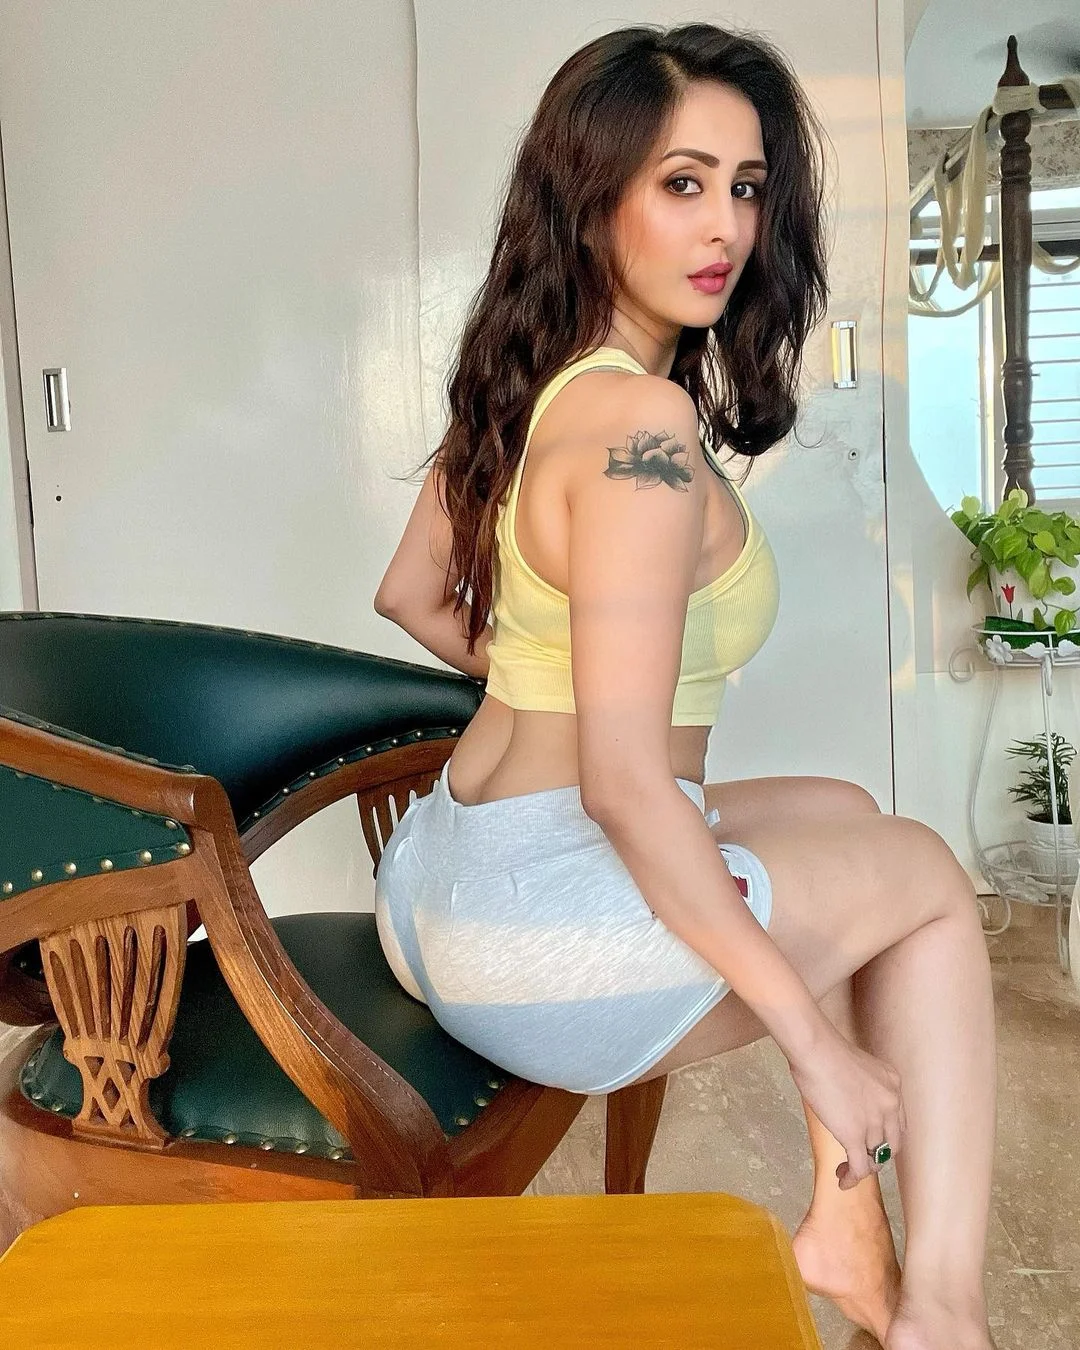 Indian Actress Chahat Khanna hot and sexy thighs and Butt | Chahat Khanna hot pictures in top And shorts jeans